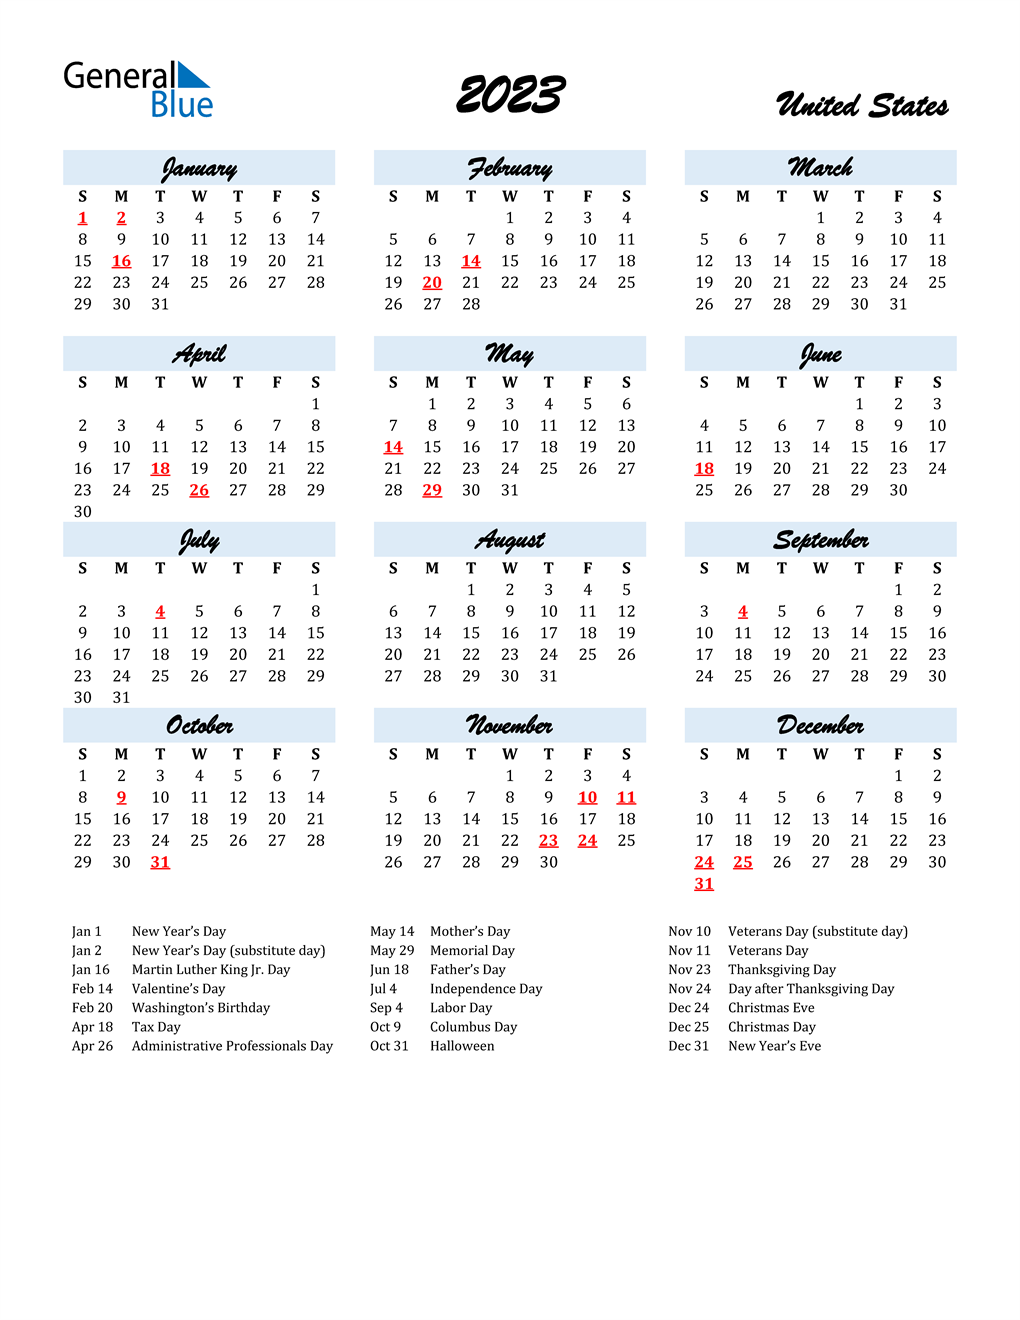 2023 United States Calendar with Holidays